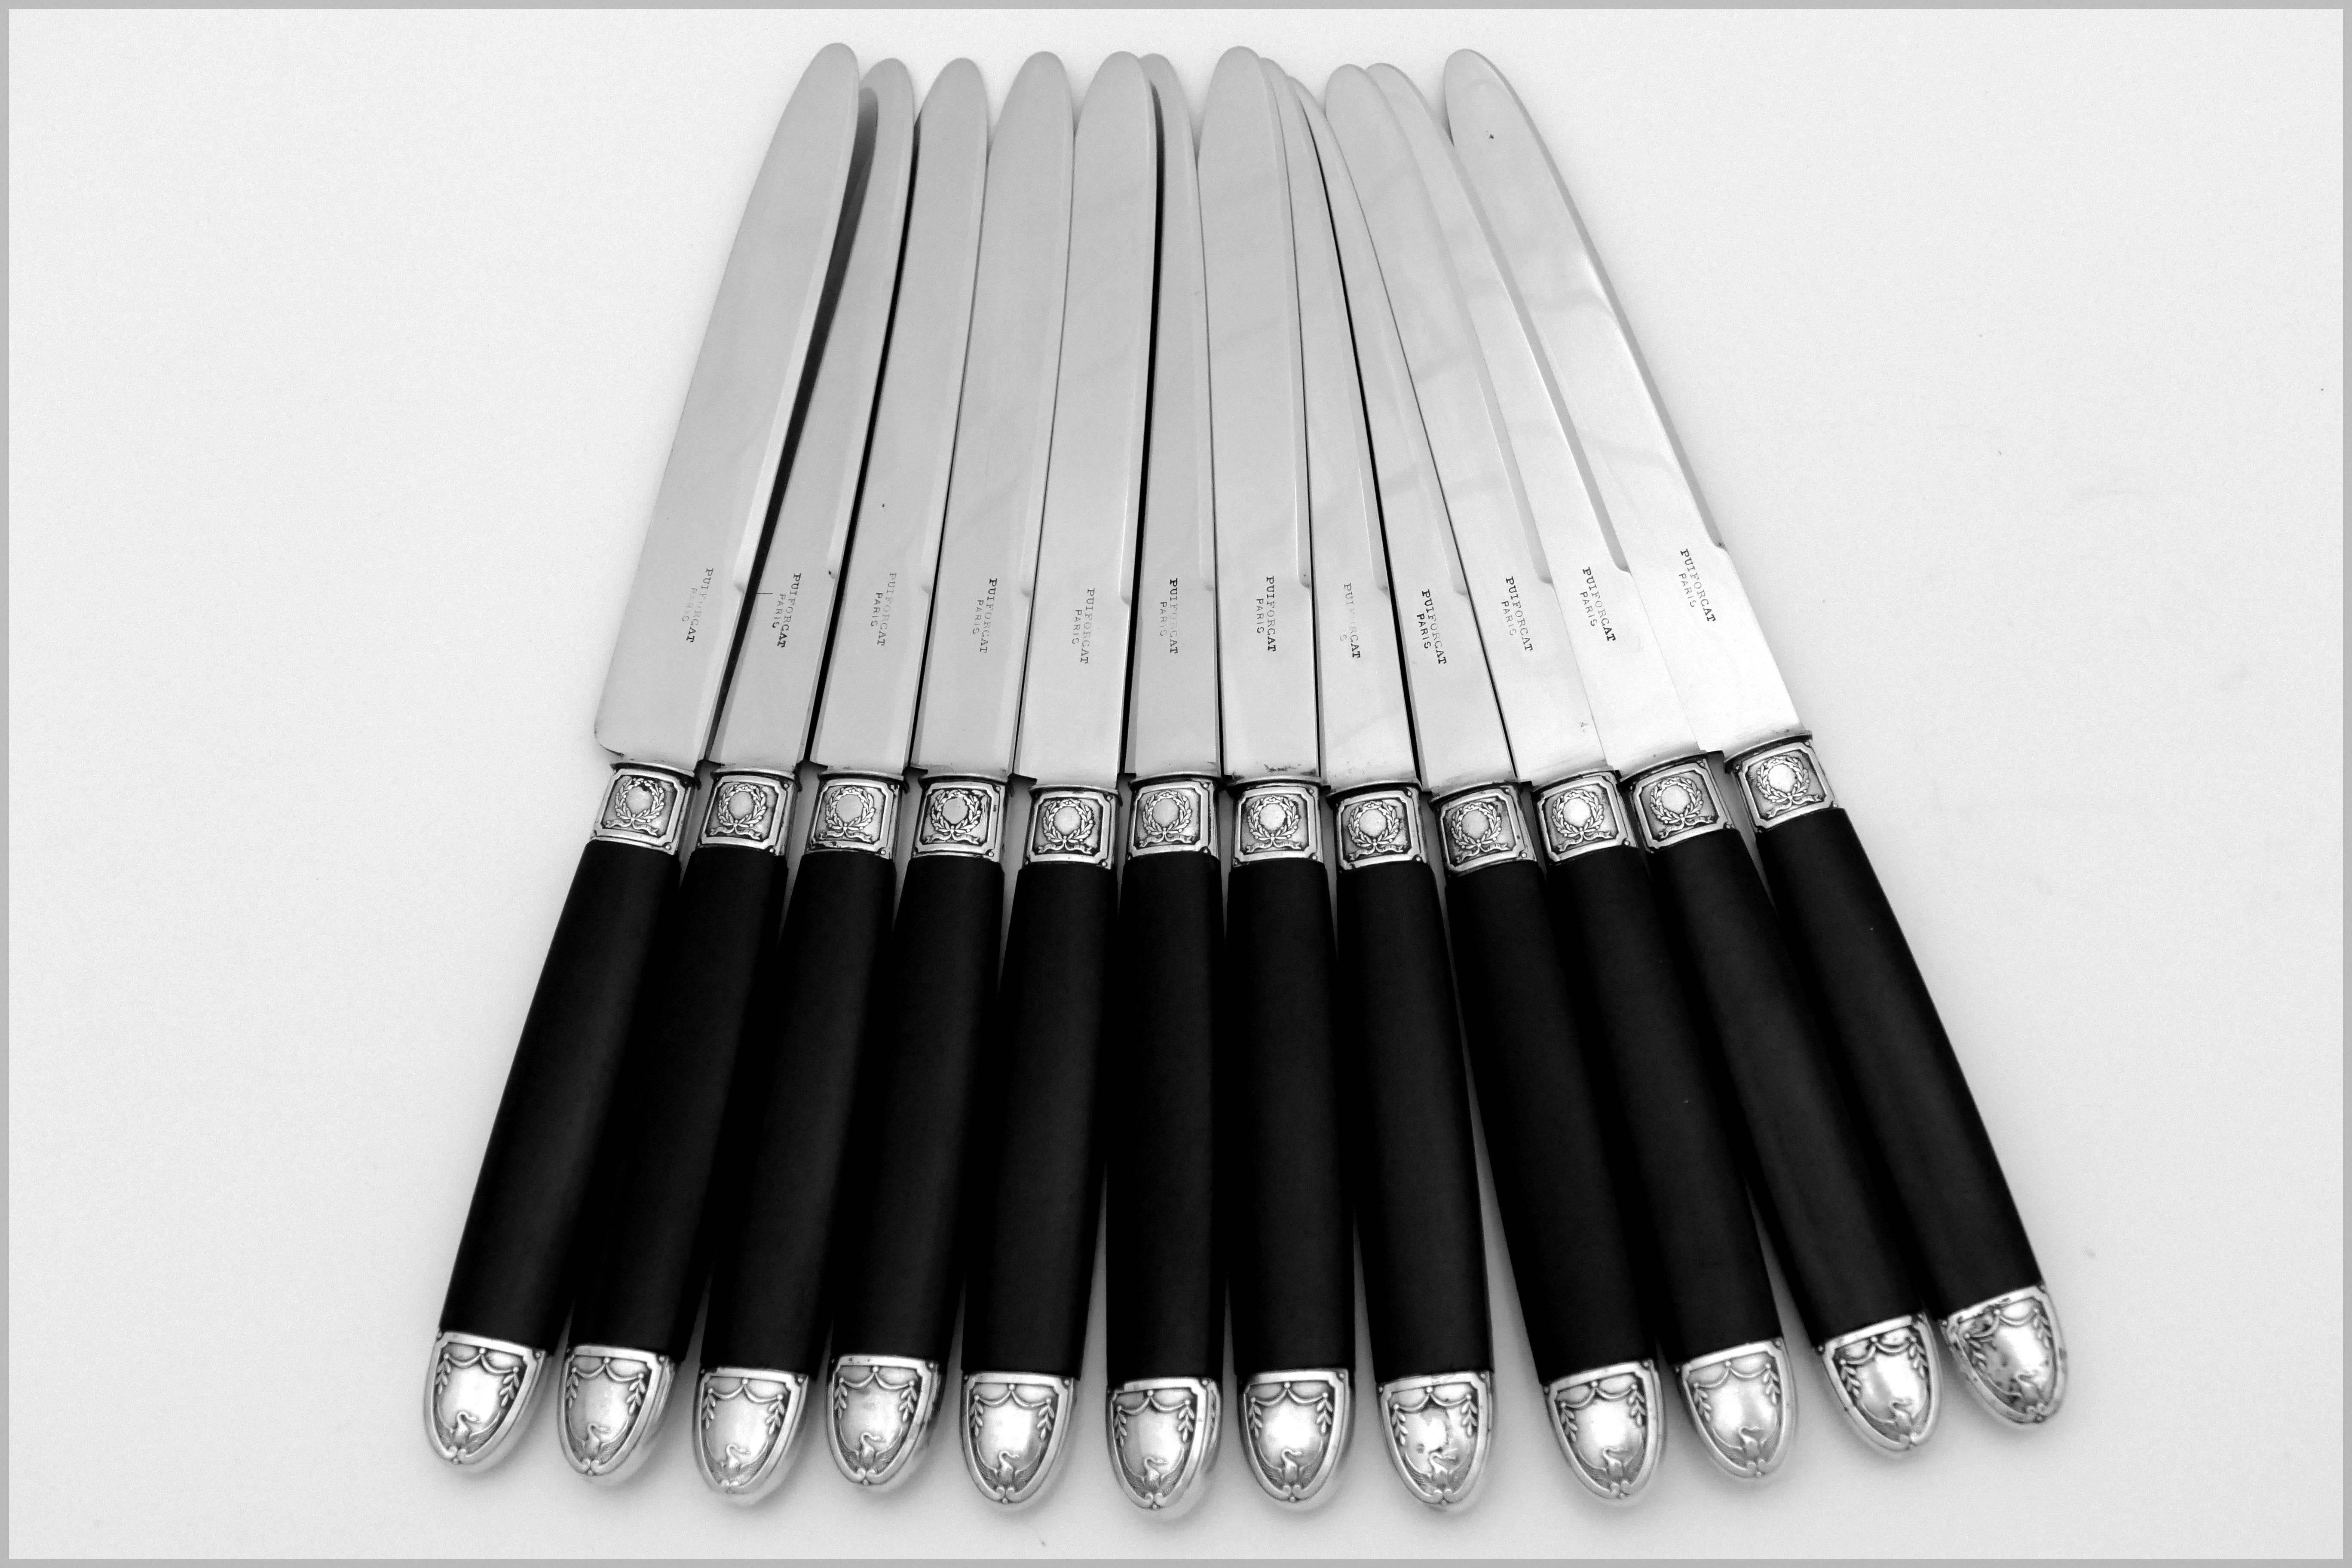 Puiforcat Rare French Sterling Silver Ebony Dinner Knife Set of 12 Pieces, Swans 3